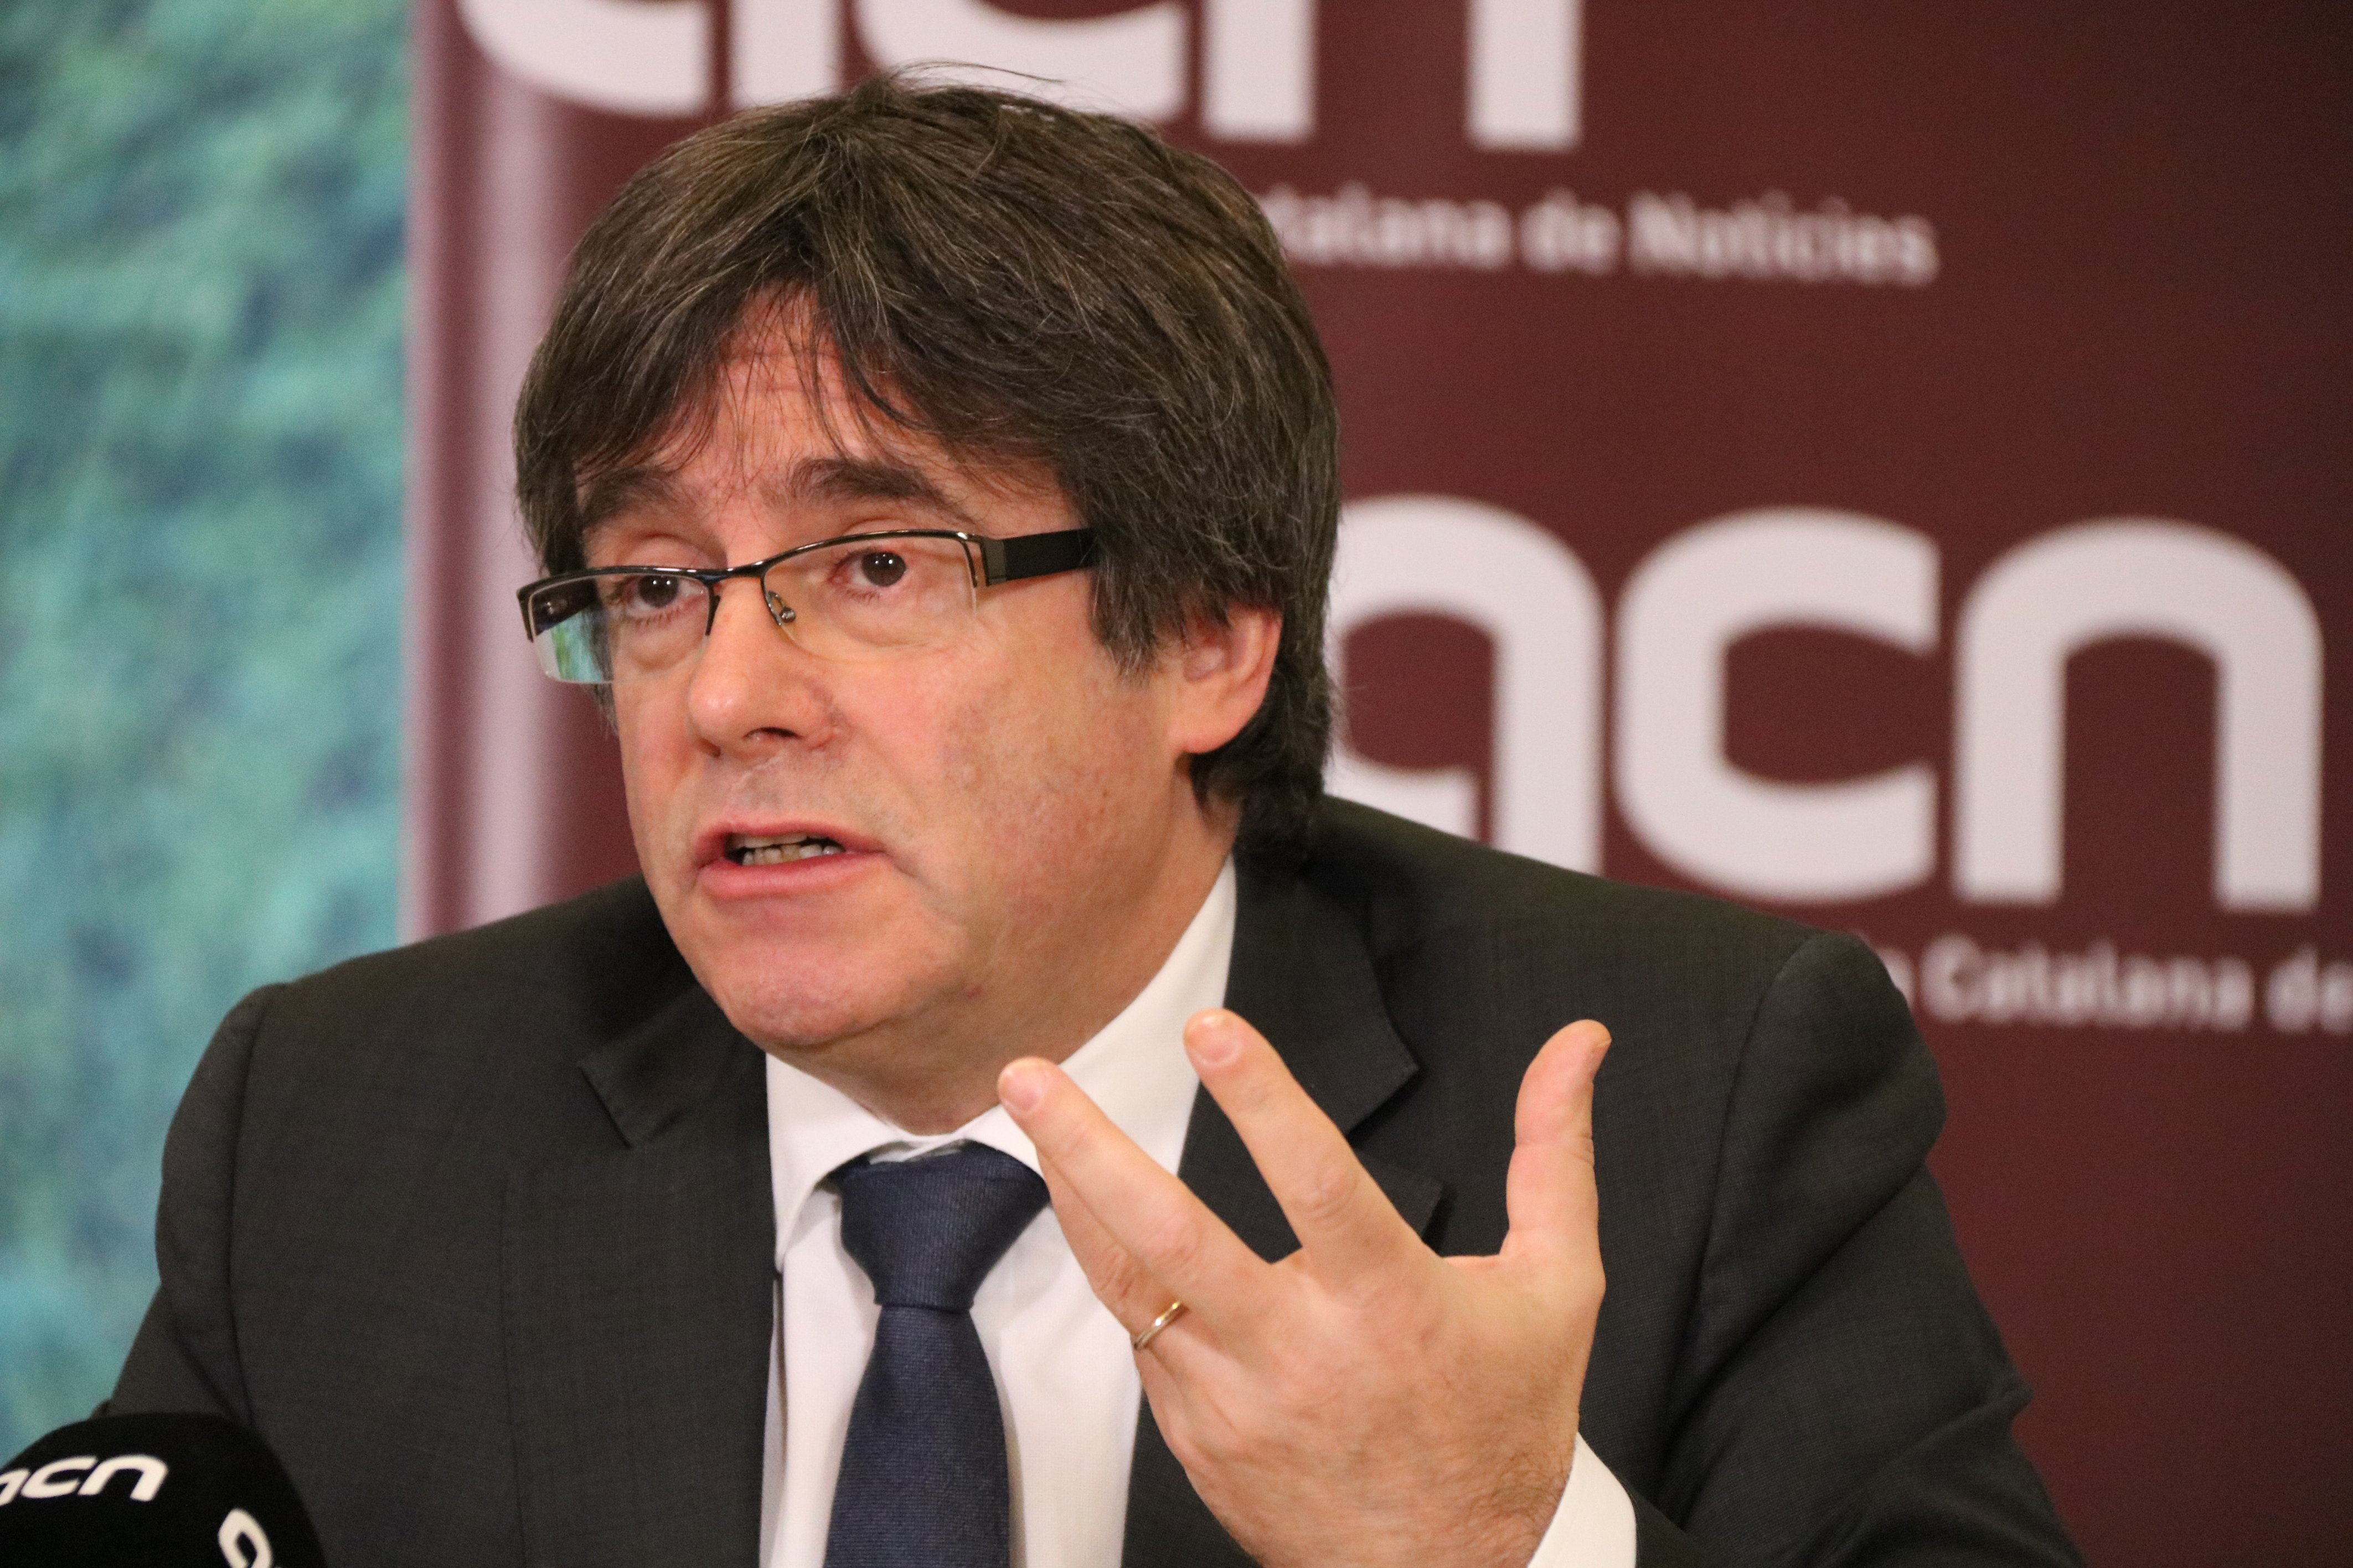 Puigdemont warns: "You've lost Catalonia and will destroy Spain"